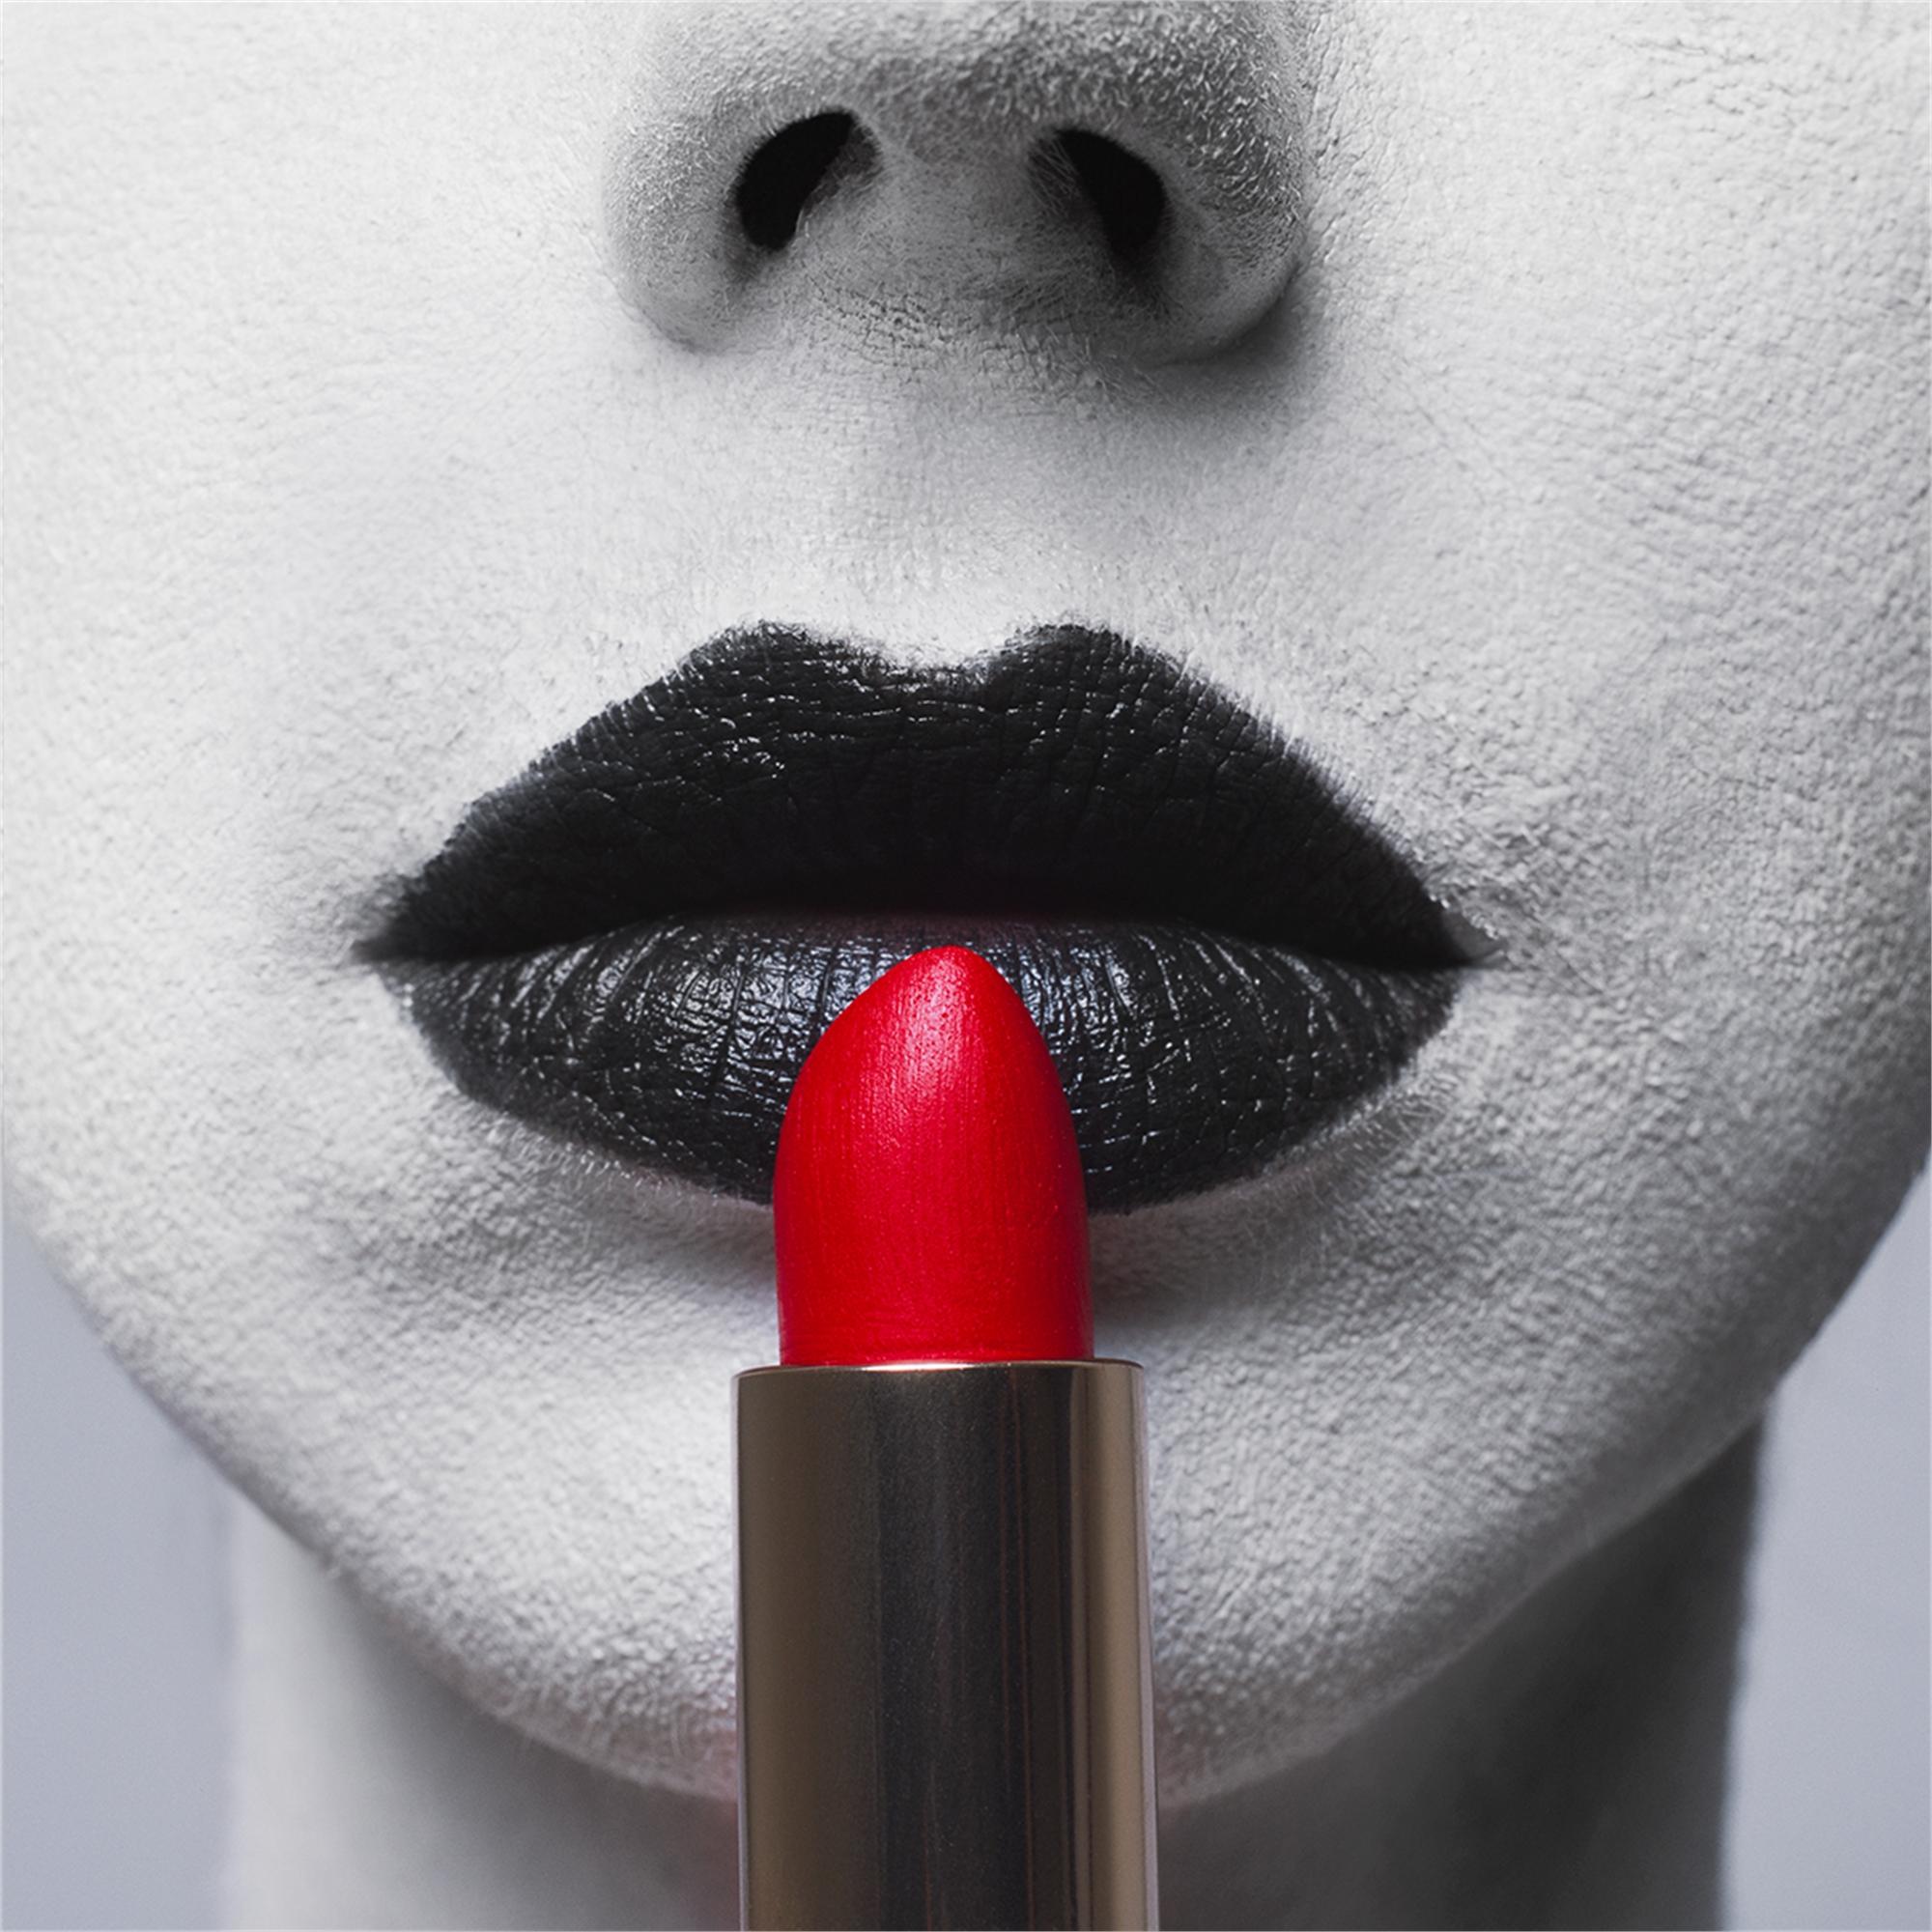 Tyler Shields Color Photograph - Red Lipstick (60" x 60")